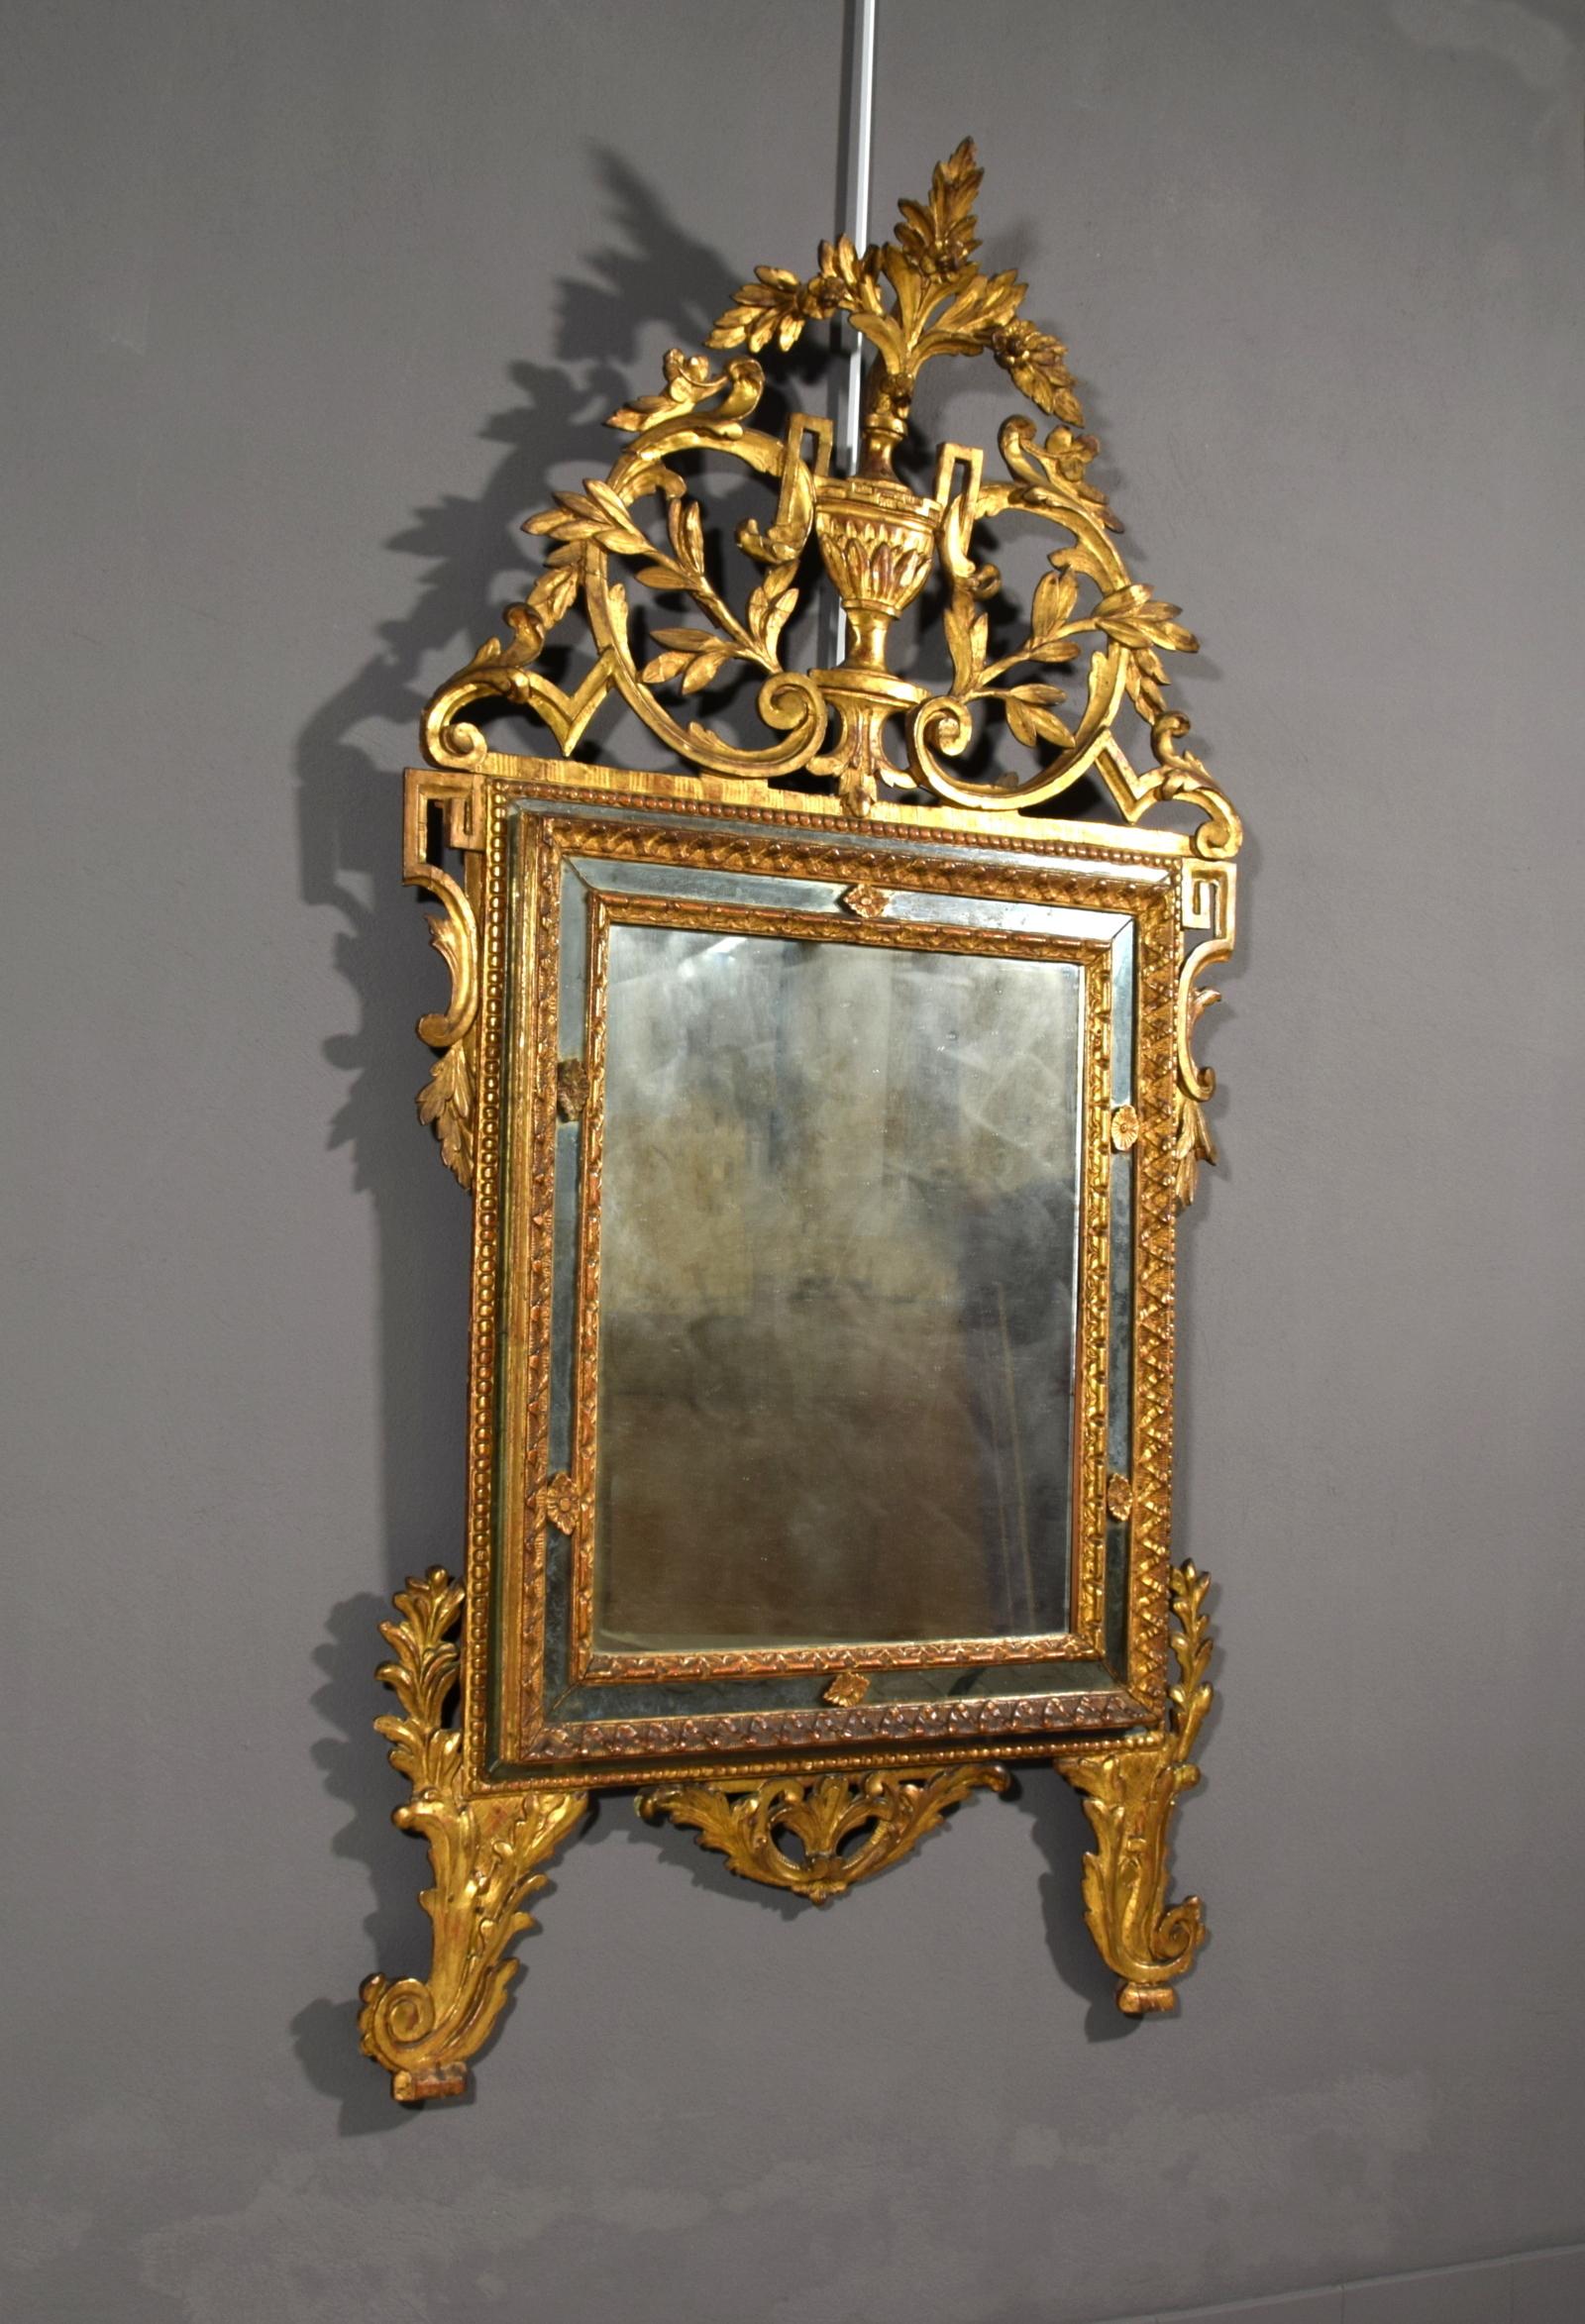 The finely carved, gilded wood mirror was made in Piedmont (northern Italy) in the 18th century.
It has a central rectangular and curved frame, molded and carved with floral and foliated motifs. The frame consists of three concentric sections. The